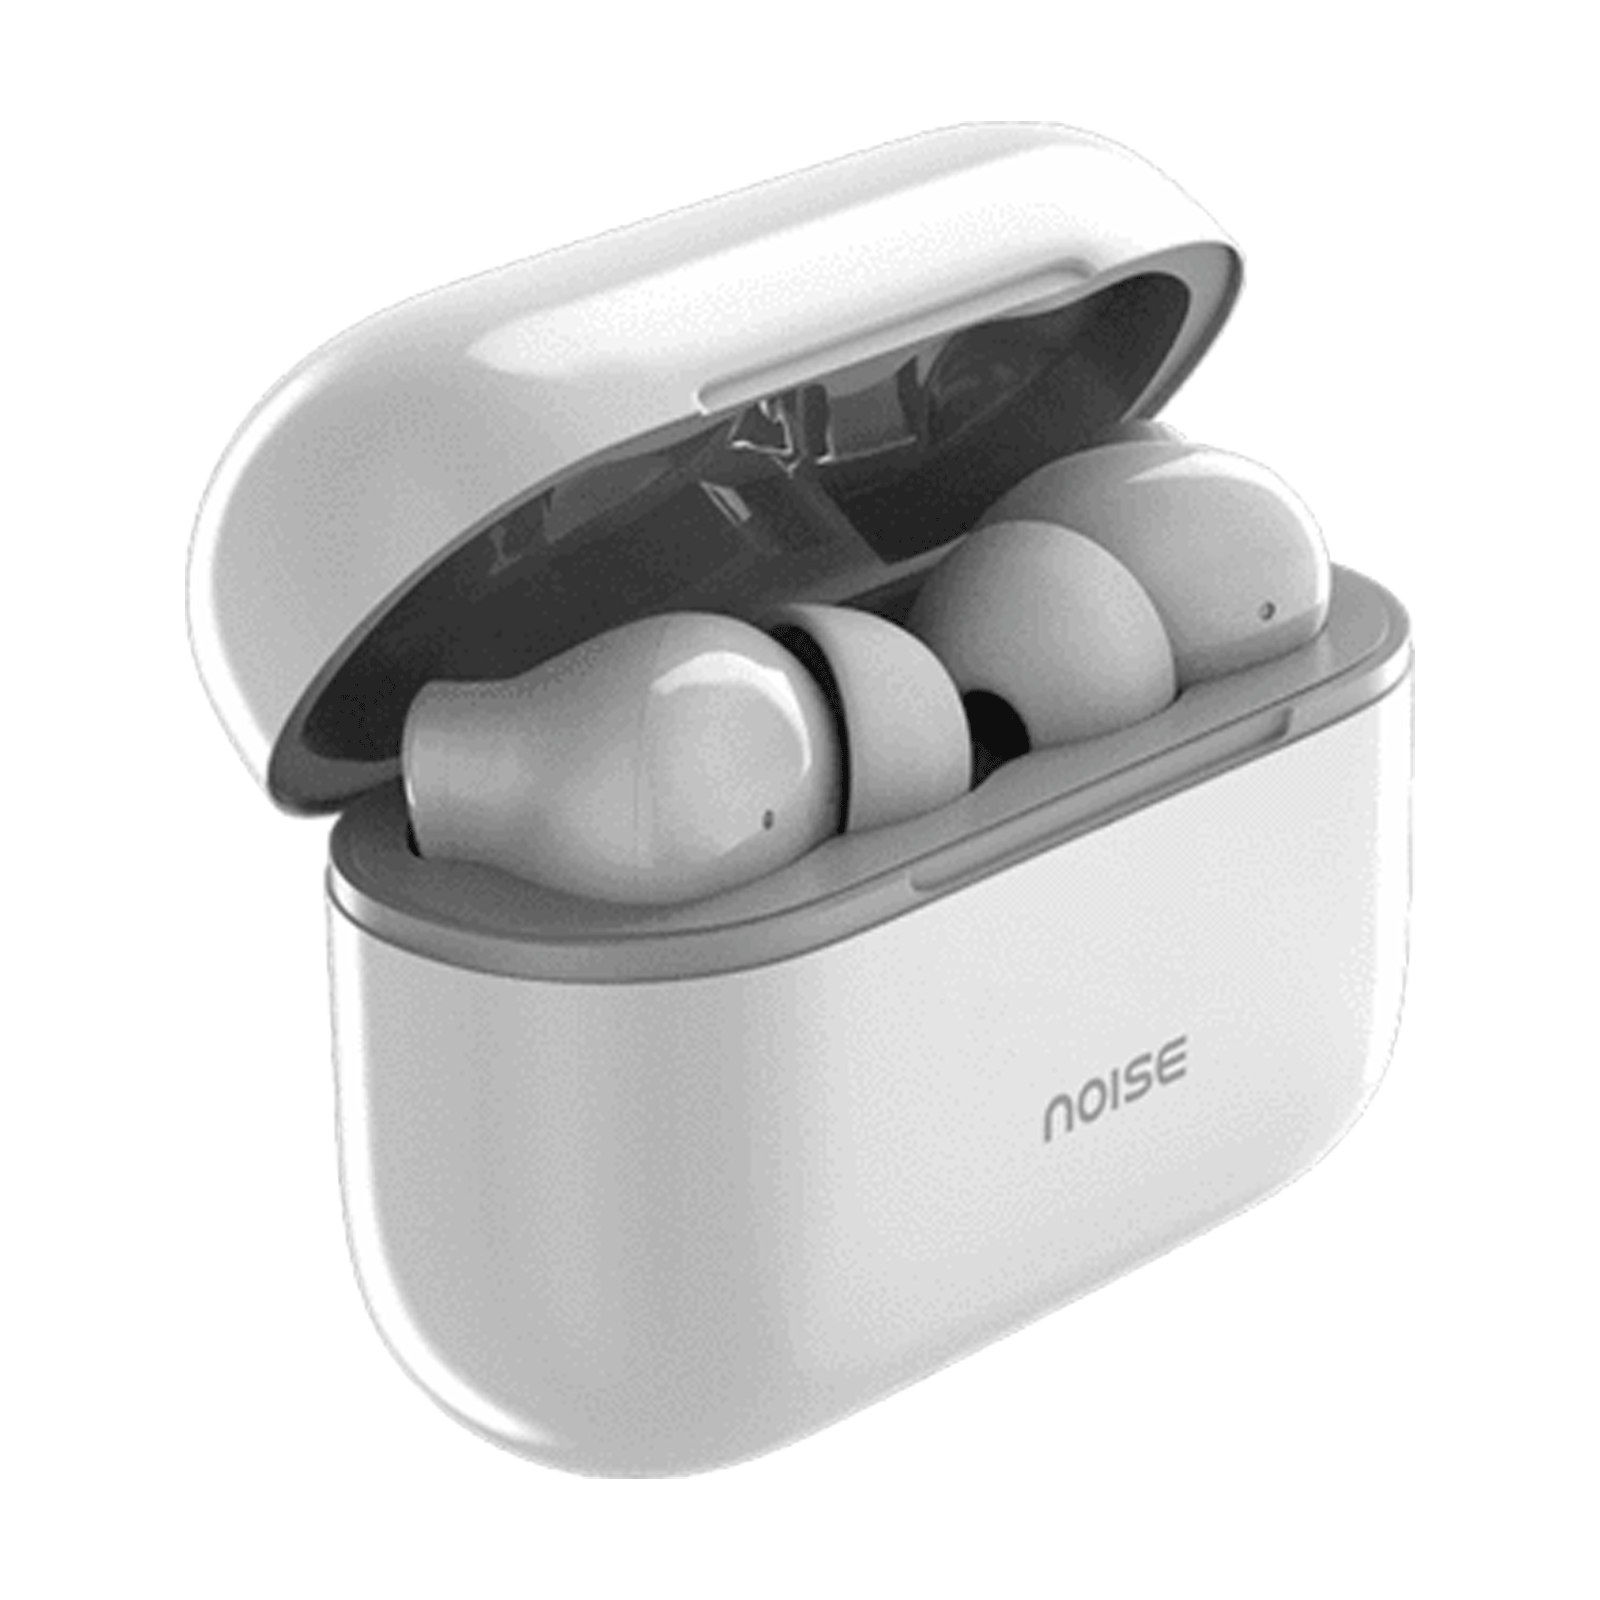 noise - noise Buds In-Ear Truly Wireless Earbuds with Mic (Bluetooth 5.1, Unique Flybird Design, AUD-HDPHN-BUDSVS10, White)